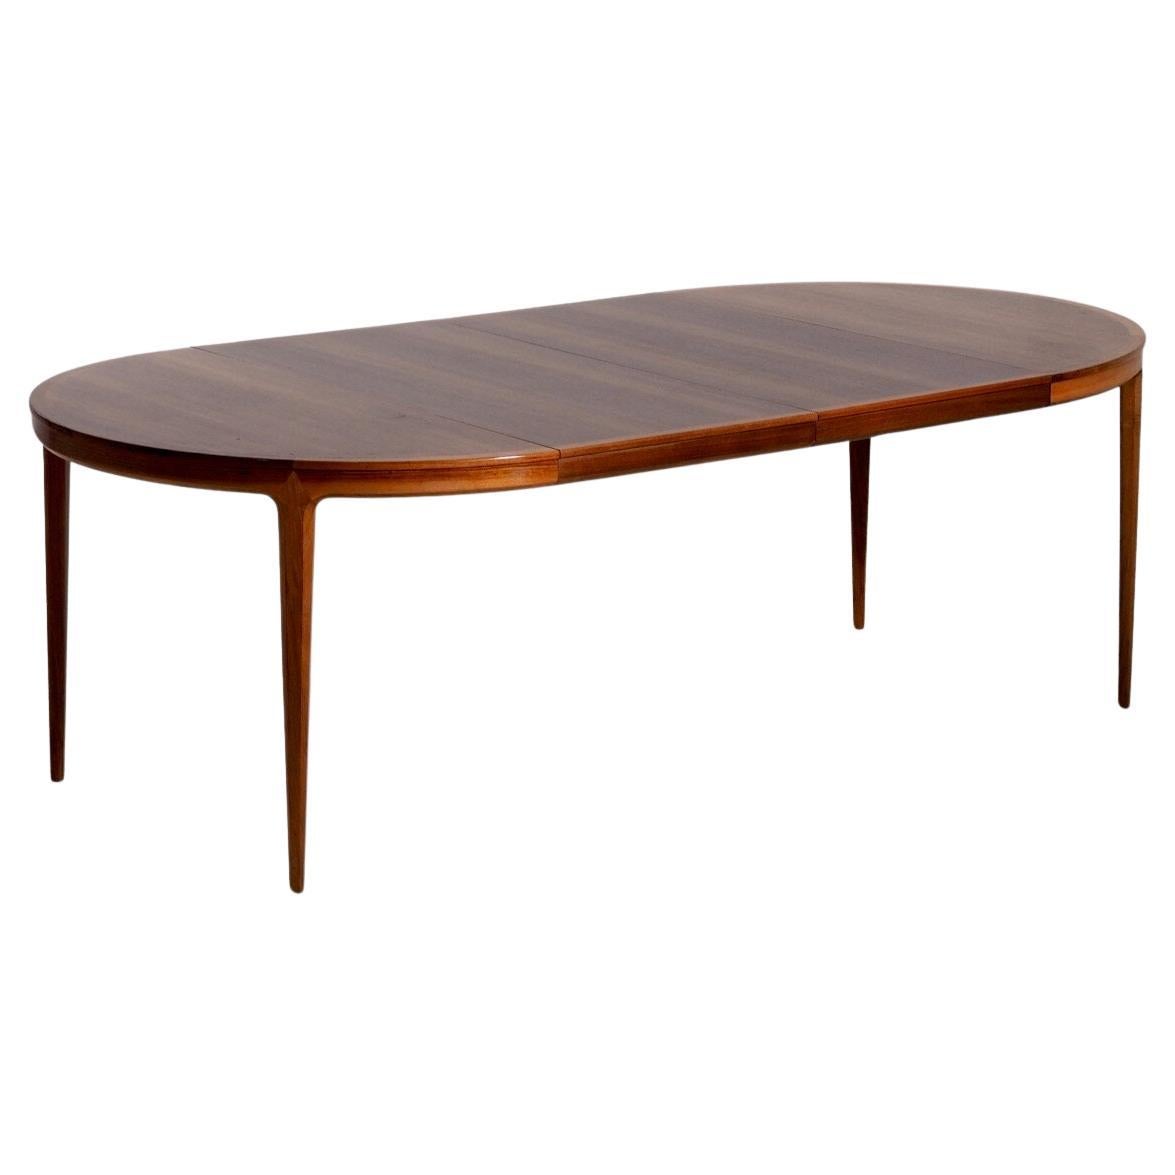 Exceptional extension table by Bertil Fridhagen, 1959. For Sale